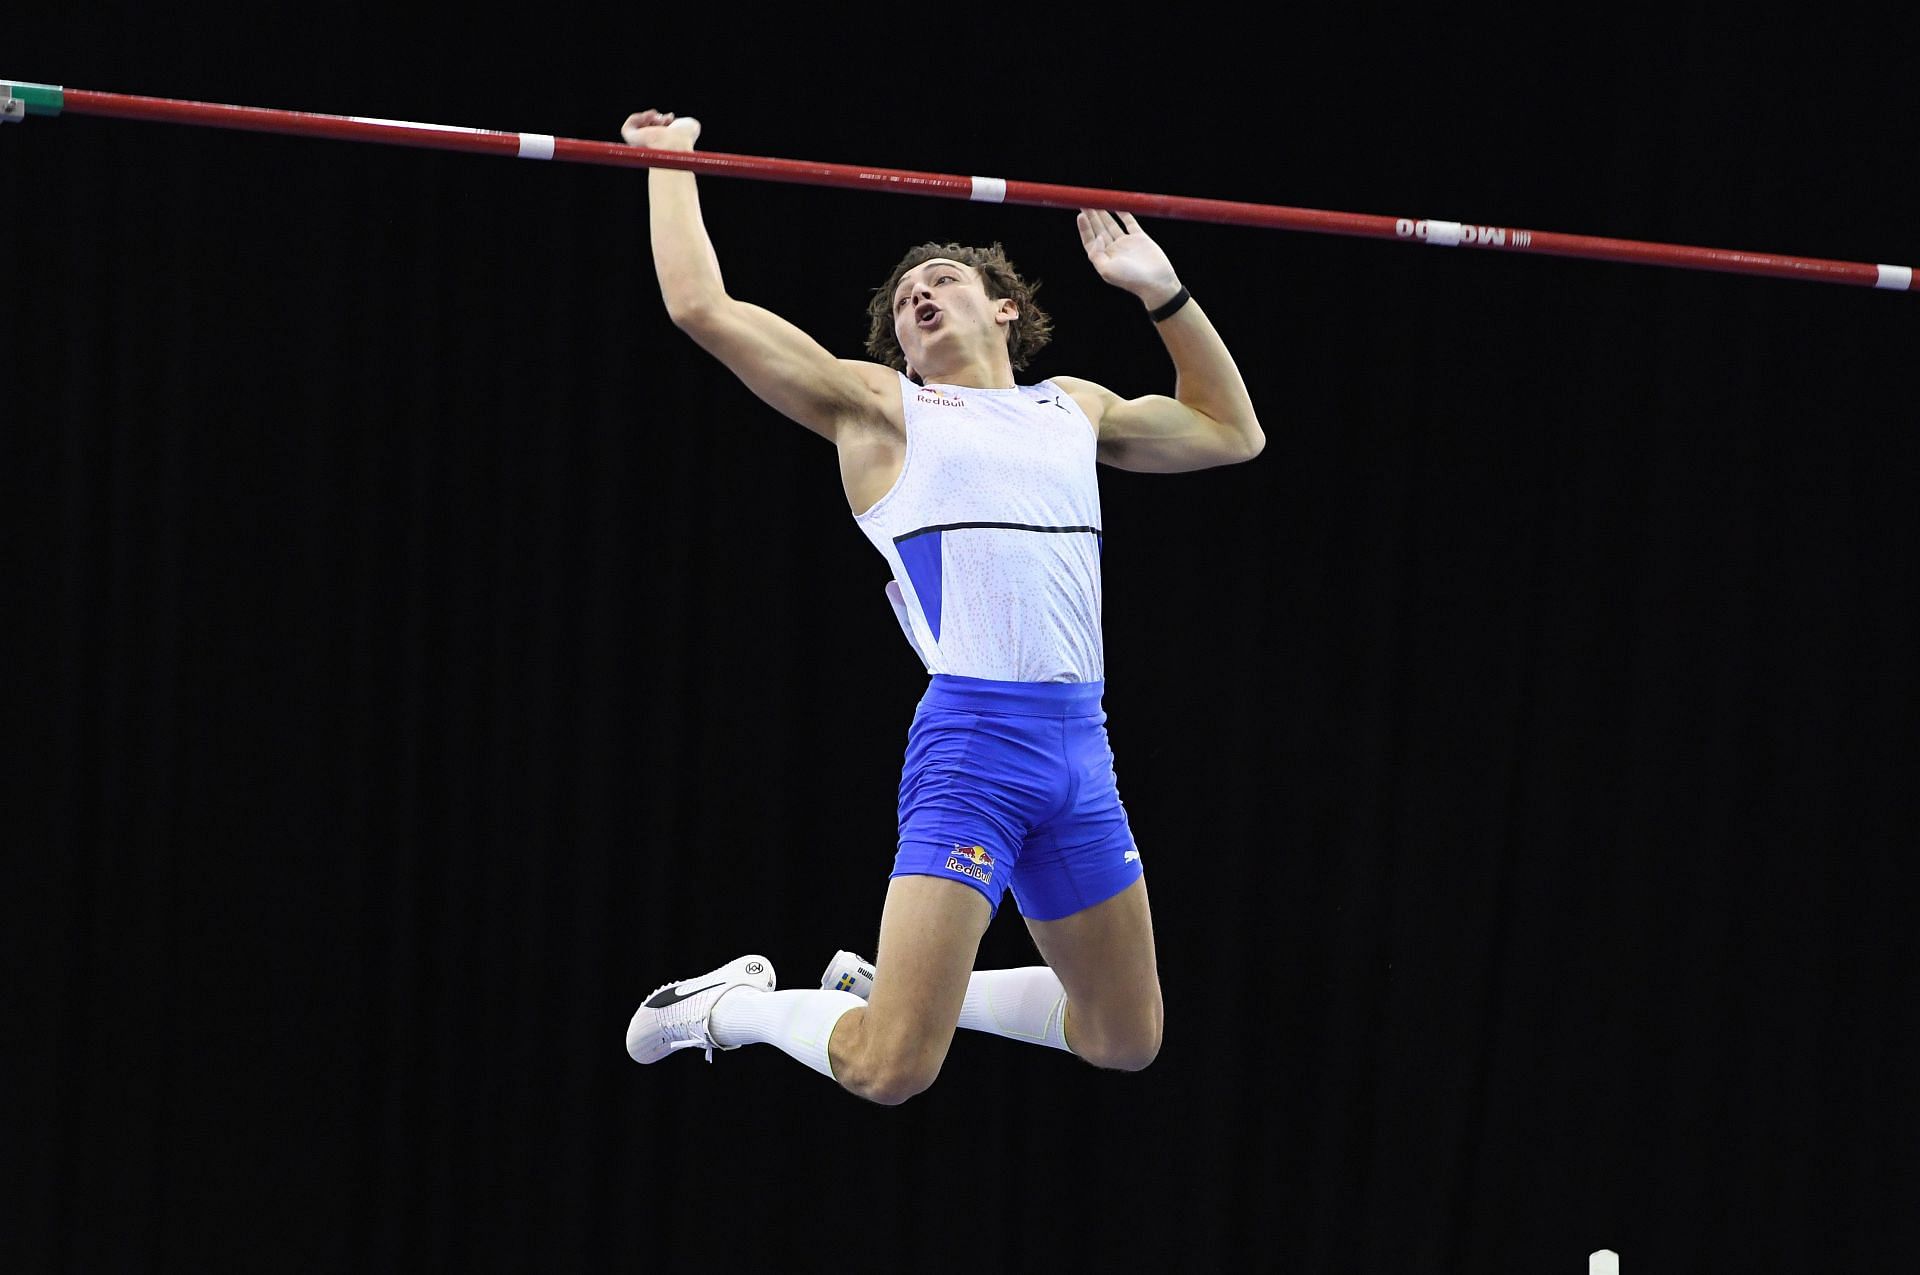 Mondo Duplantis in action at the Muller Indoor Grand Prix. (PC: Getty Images)